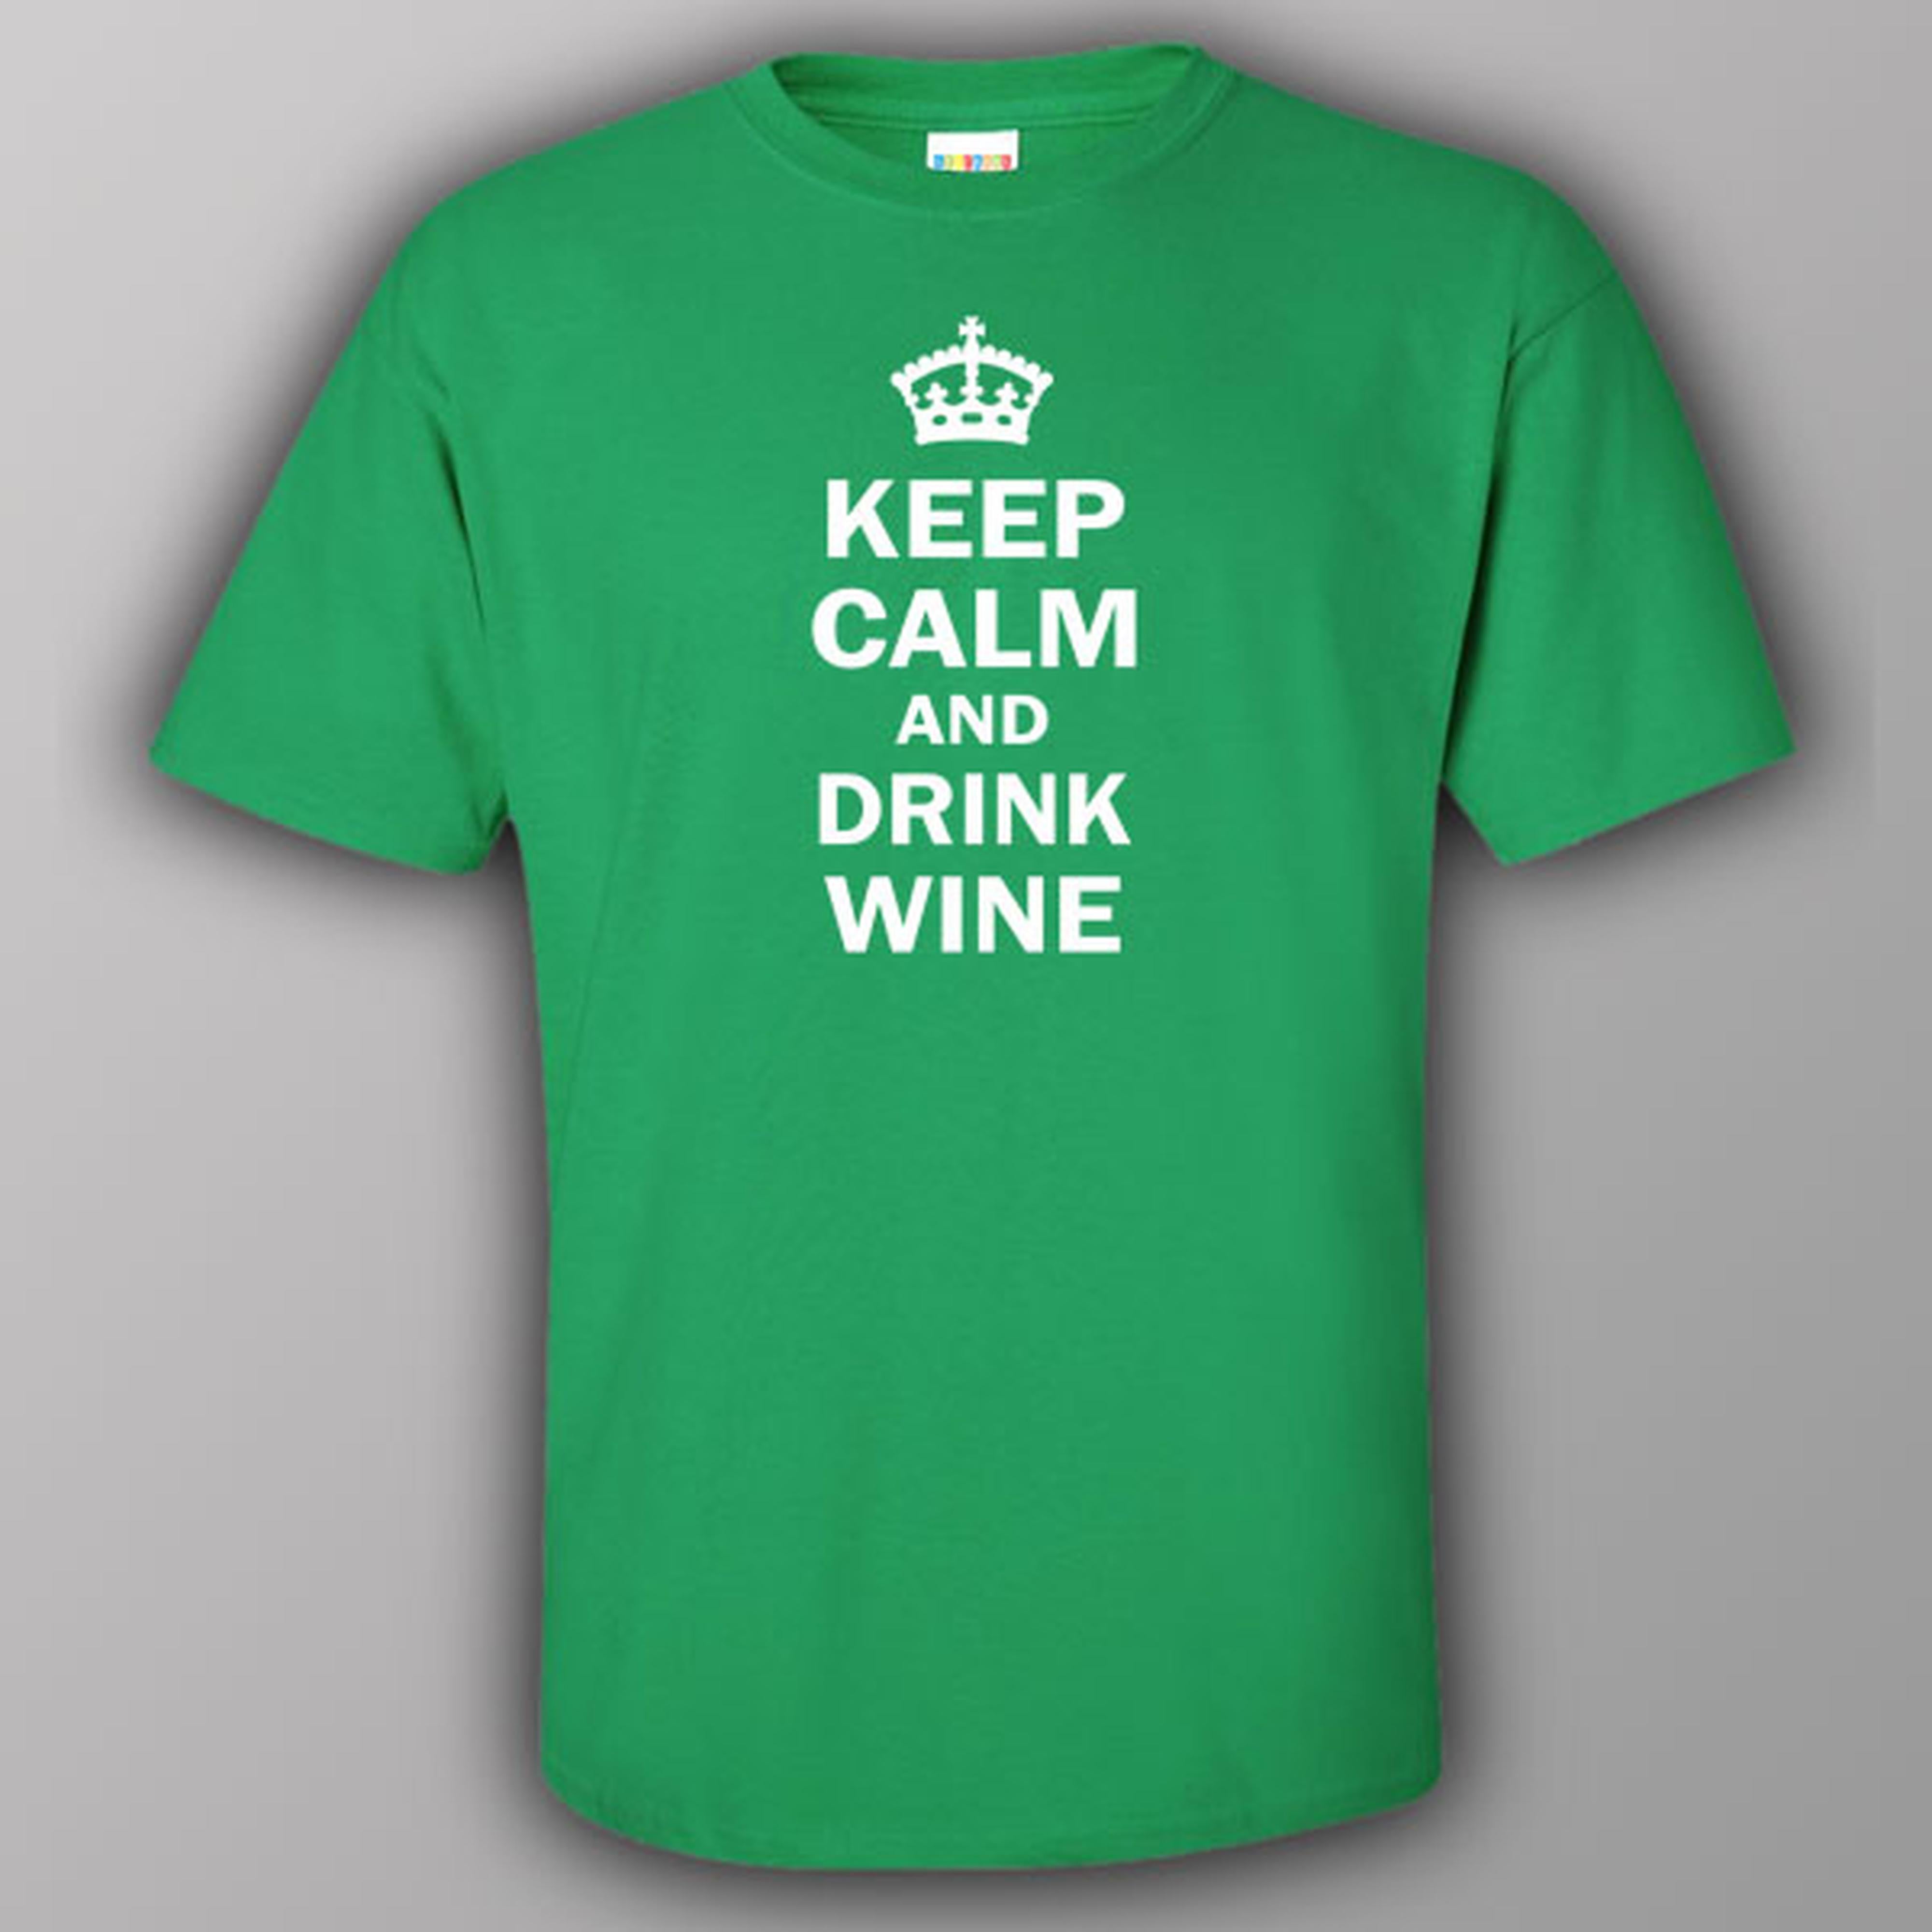 Keep calm and drink wine - T-shirt